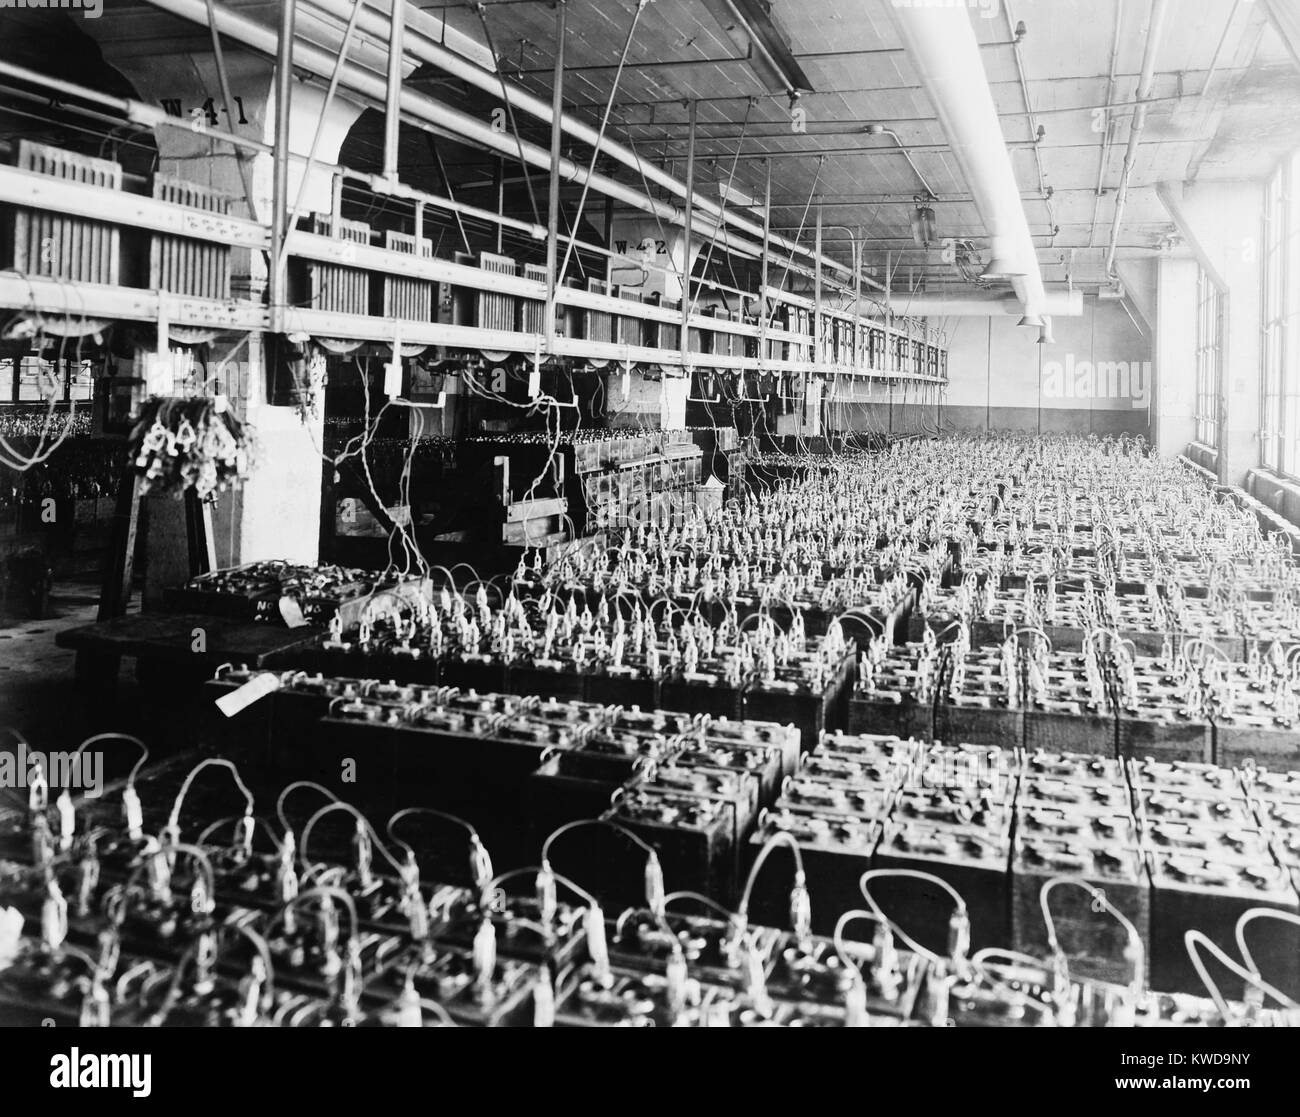 An assembly of 3500 lead-acid batteries at the Ford Motor Company in 1924. With the introduction of electric battery powered starters, drivers no longer had to 'crank' start their car engines (BSLOC 2016 10 43) Stock Photo